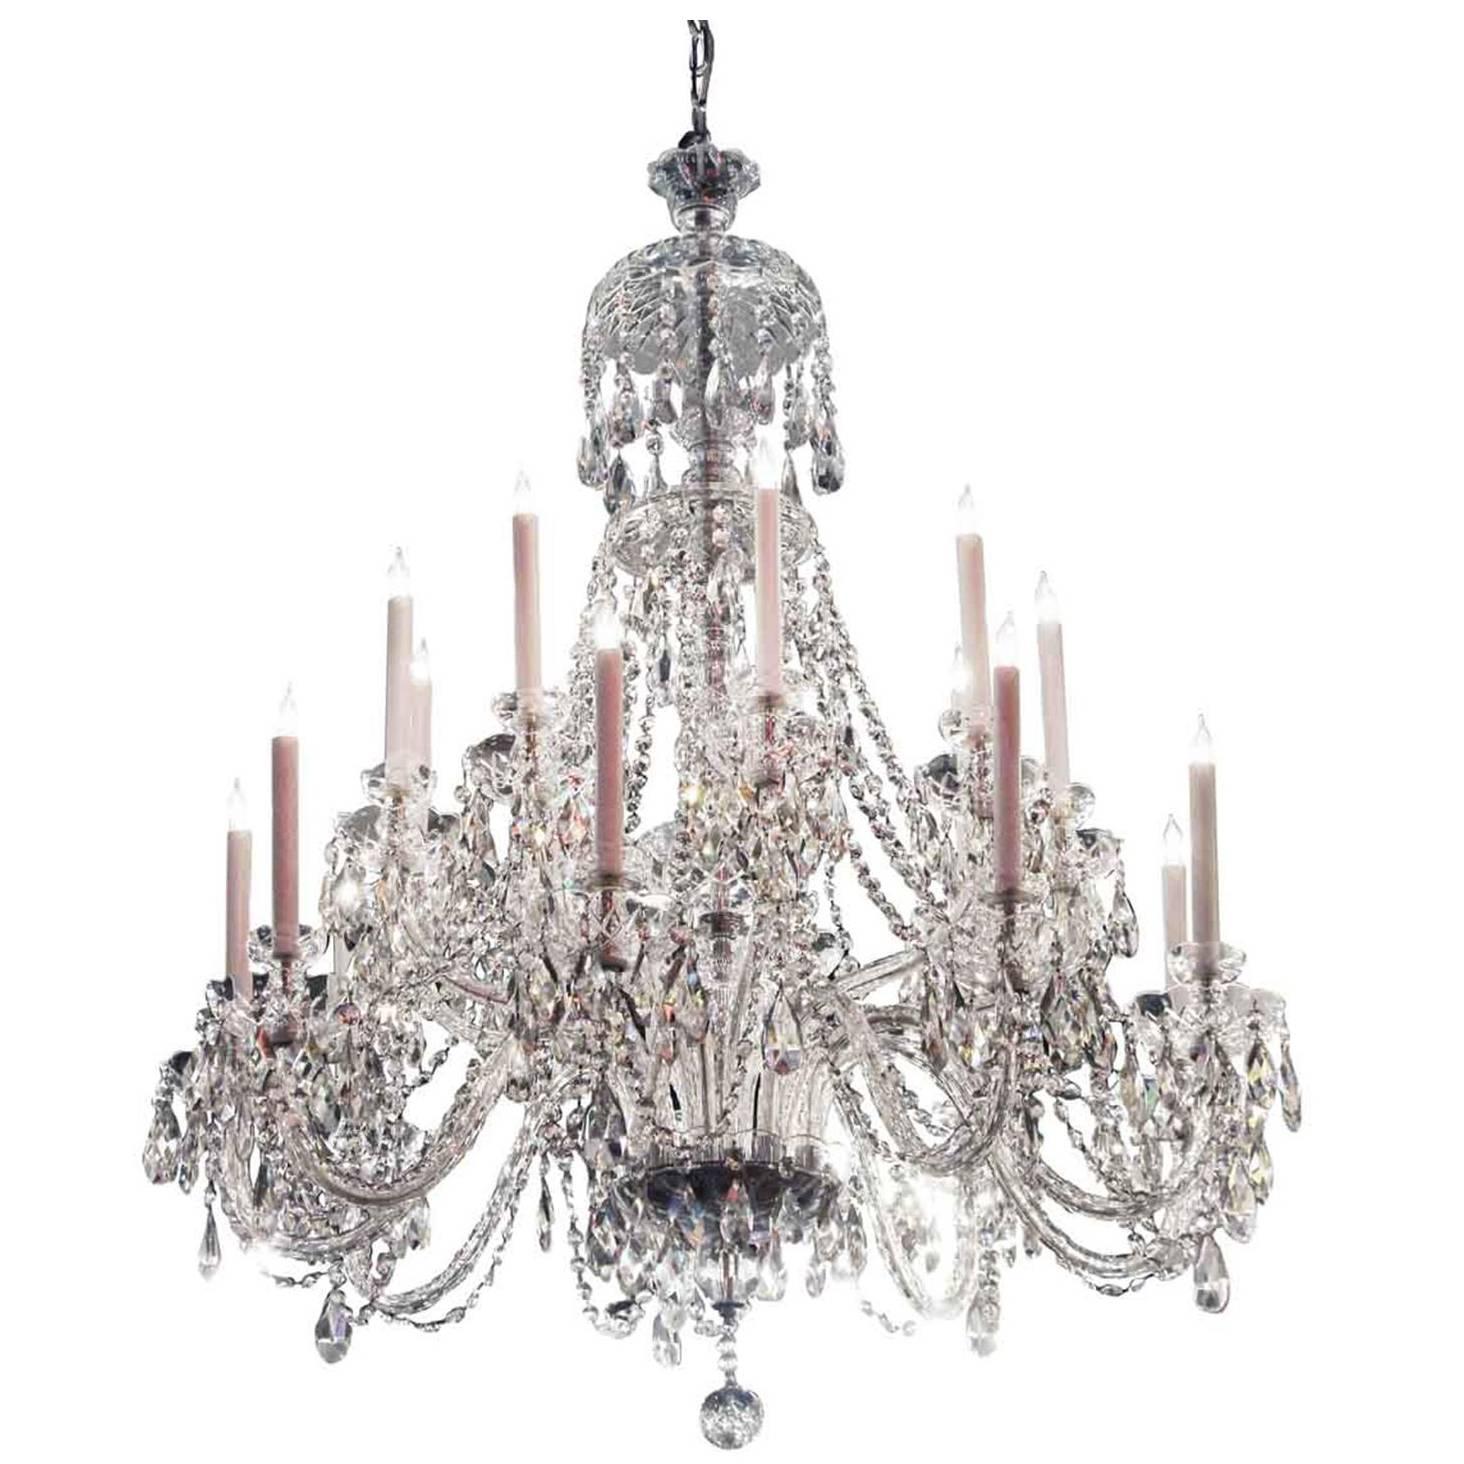 1960s Elegant Large Eighteen-Arm Crystal Chandelier with Draping Crystal Beading